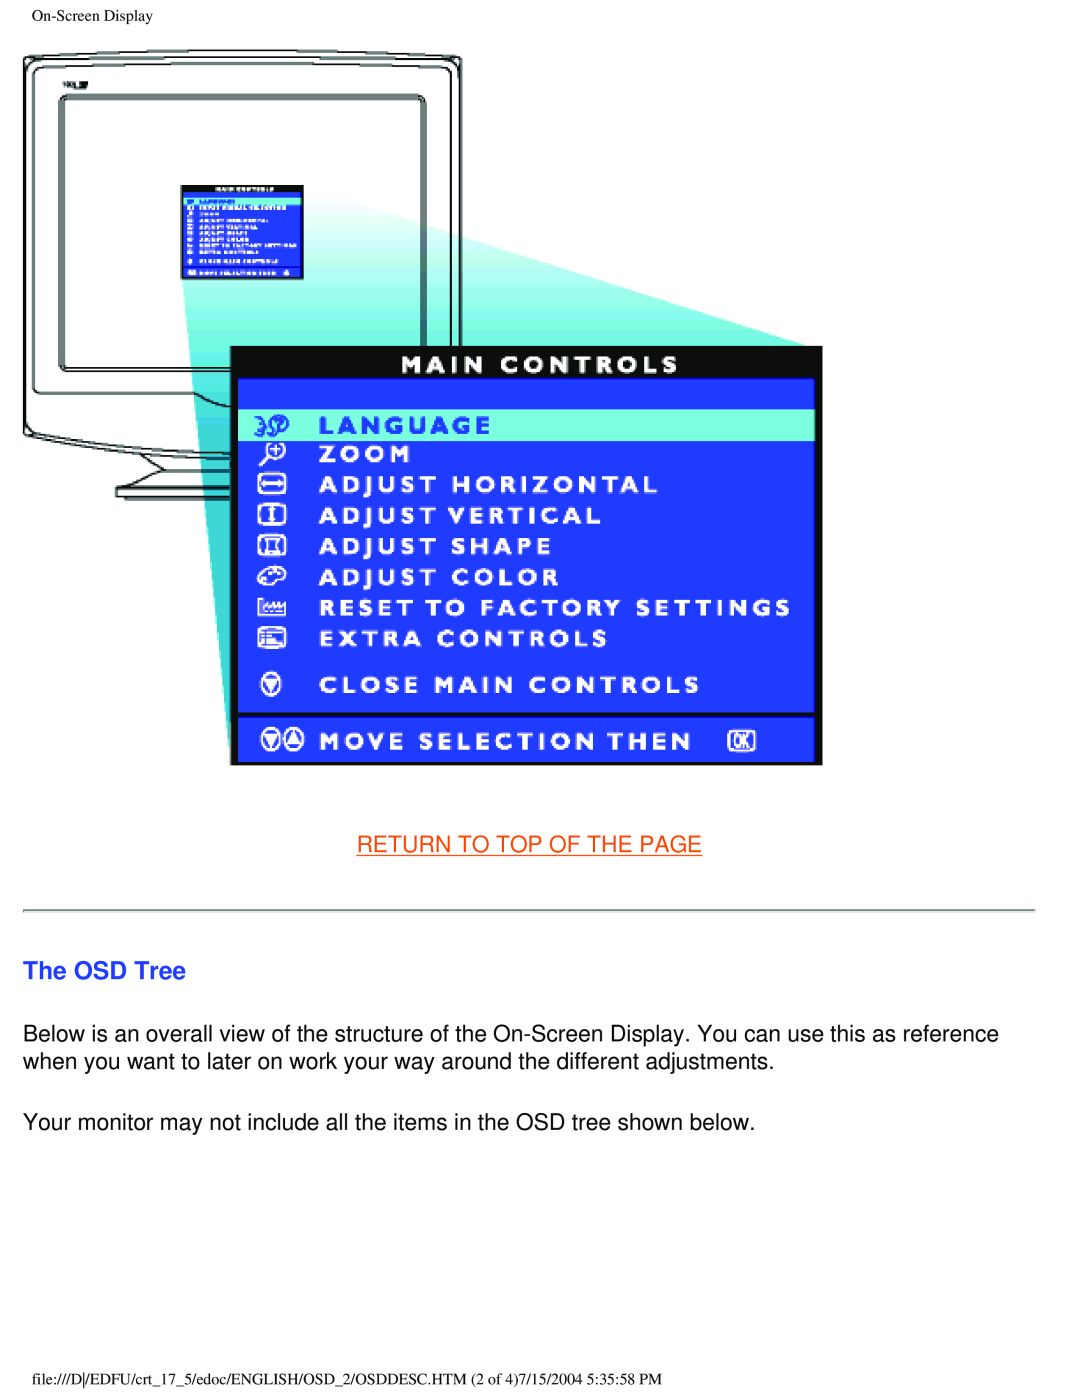 Philips 107G user manual The OSD Tree, Return To Top Of The Page, On-Screen Display 